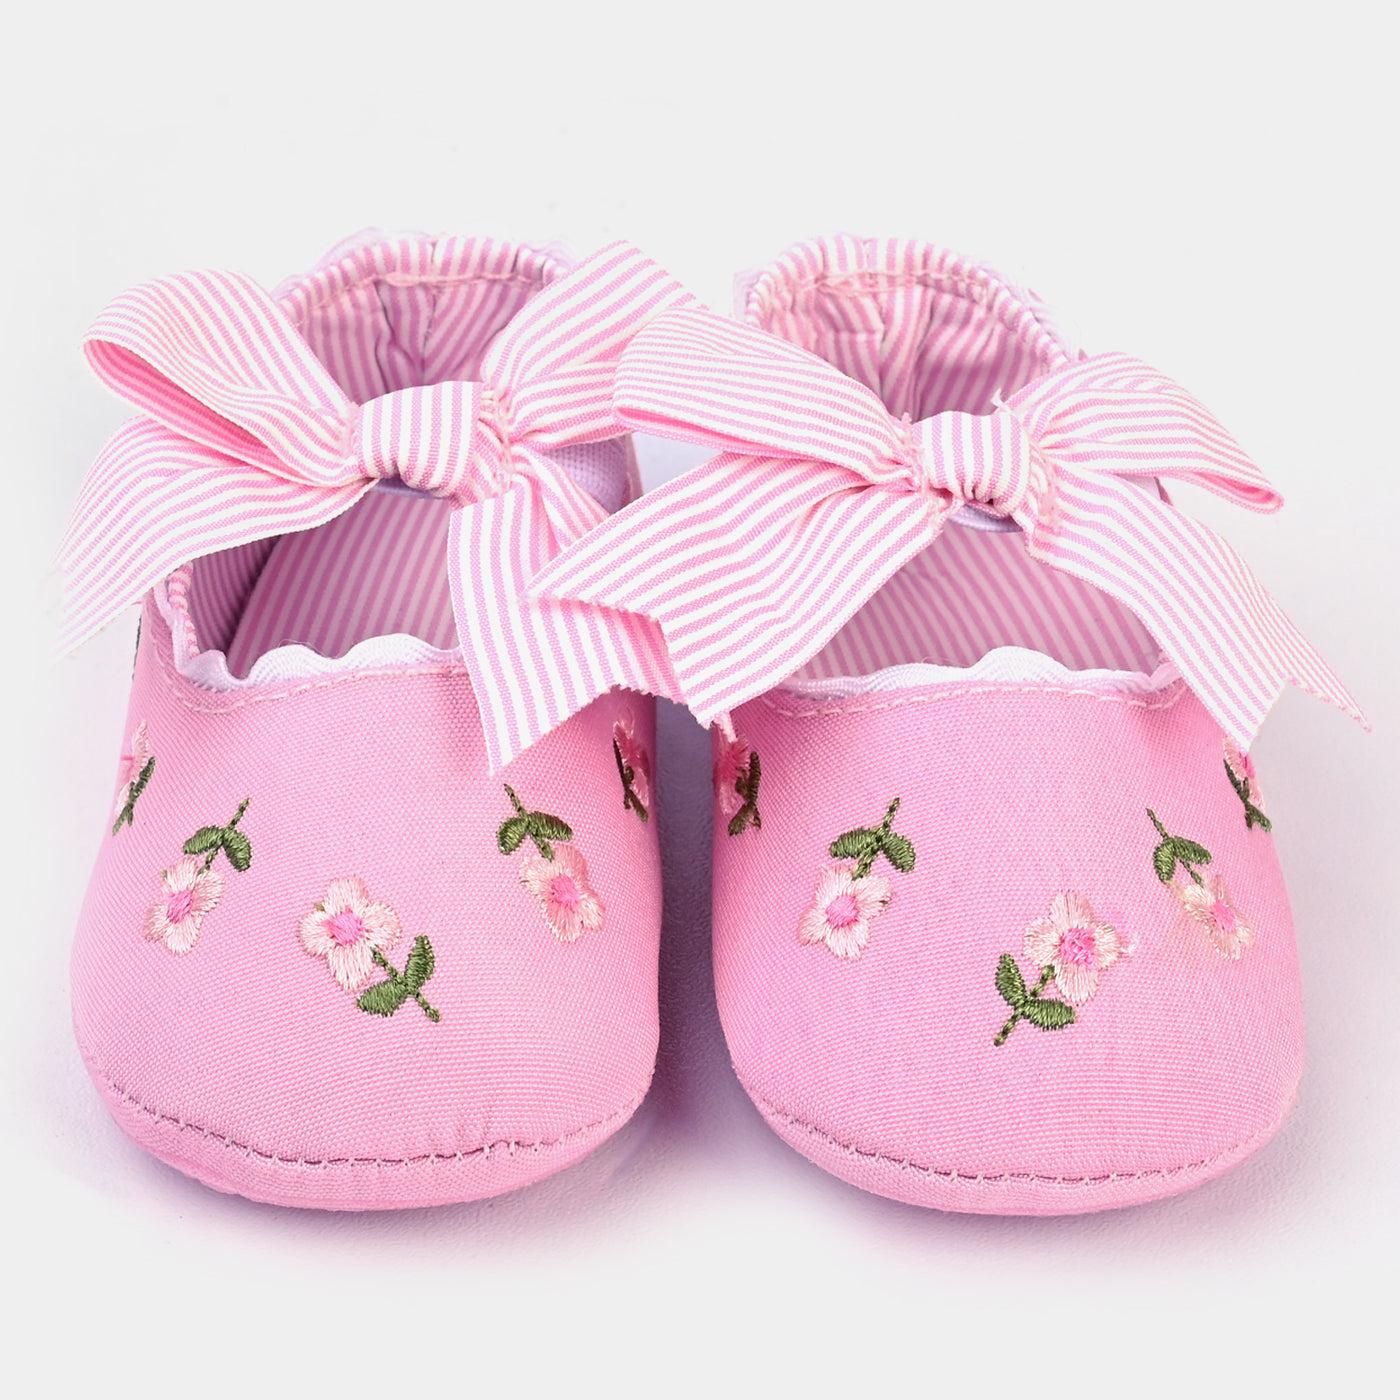 Baby Girls Shoes C-477-Pink